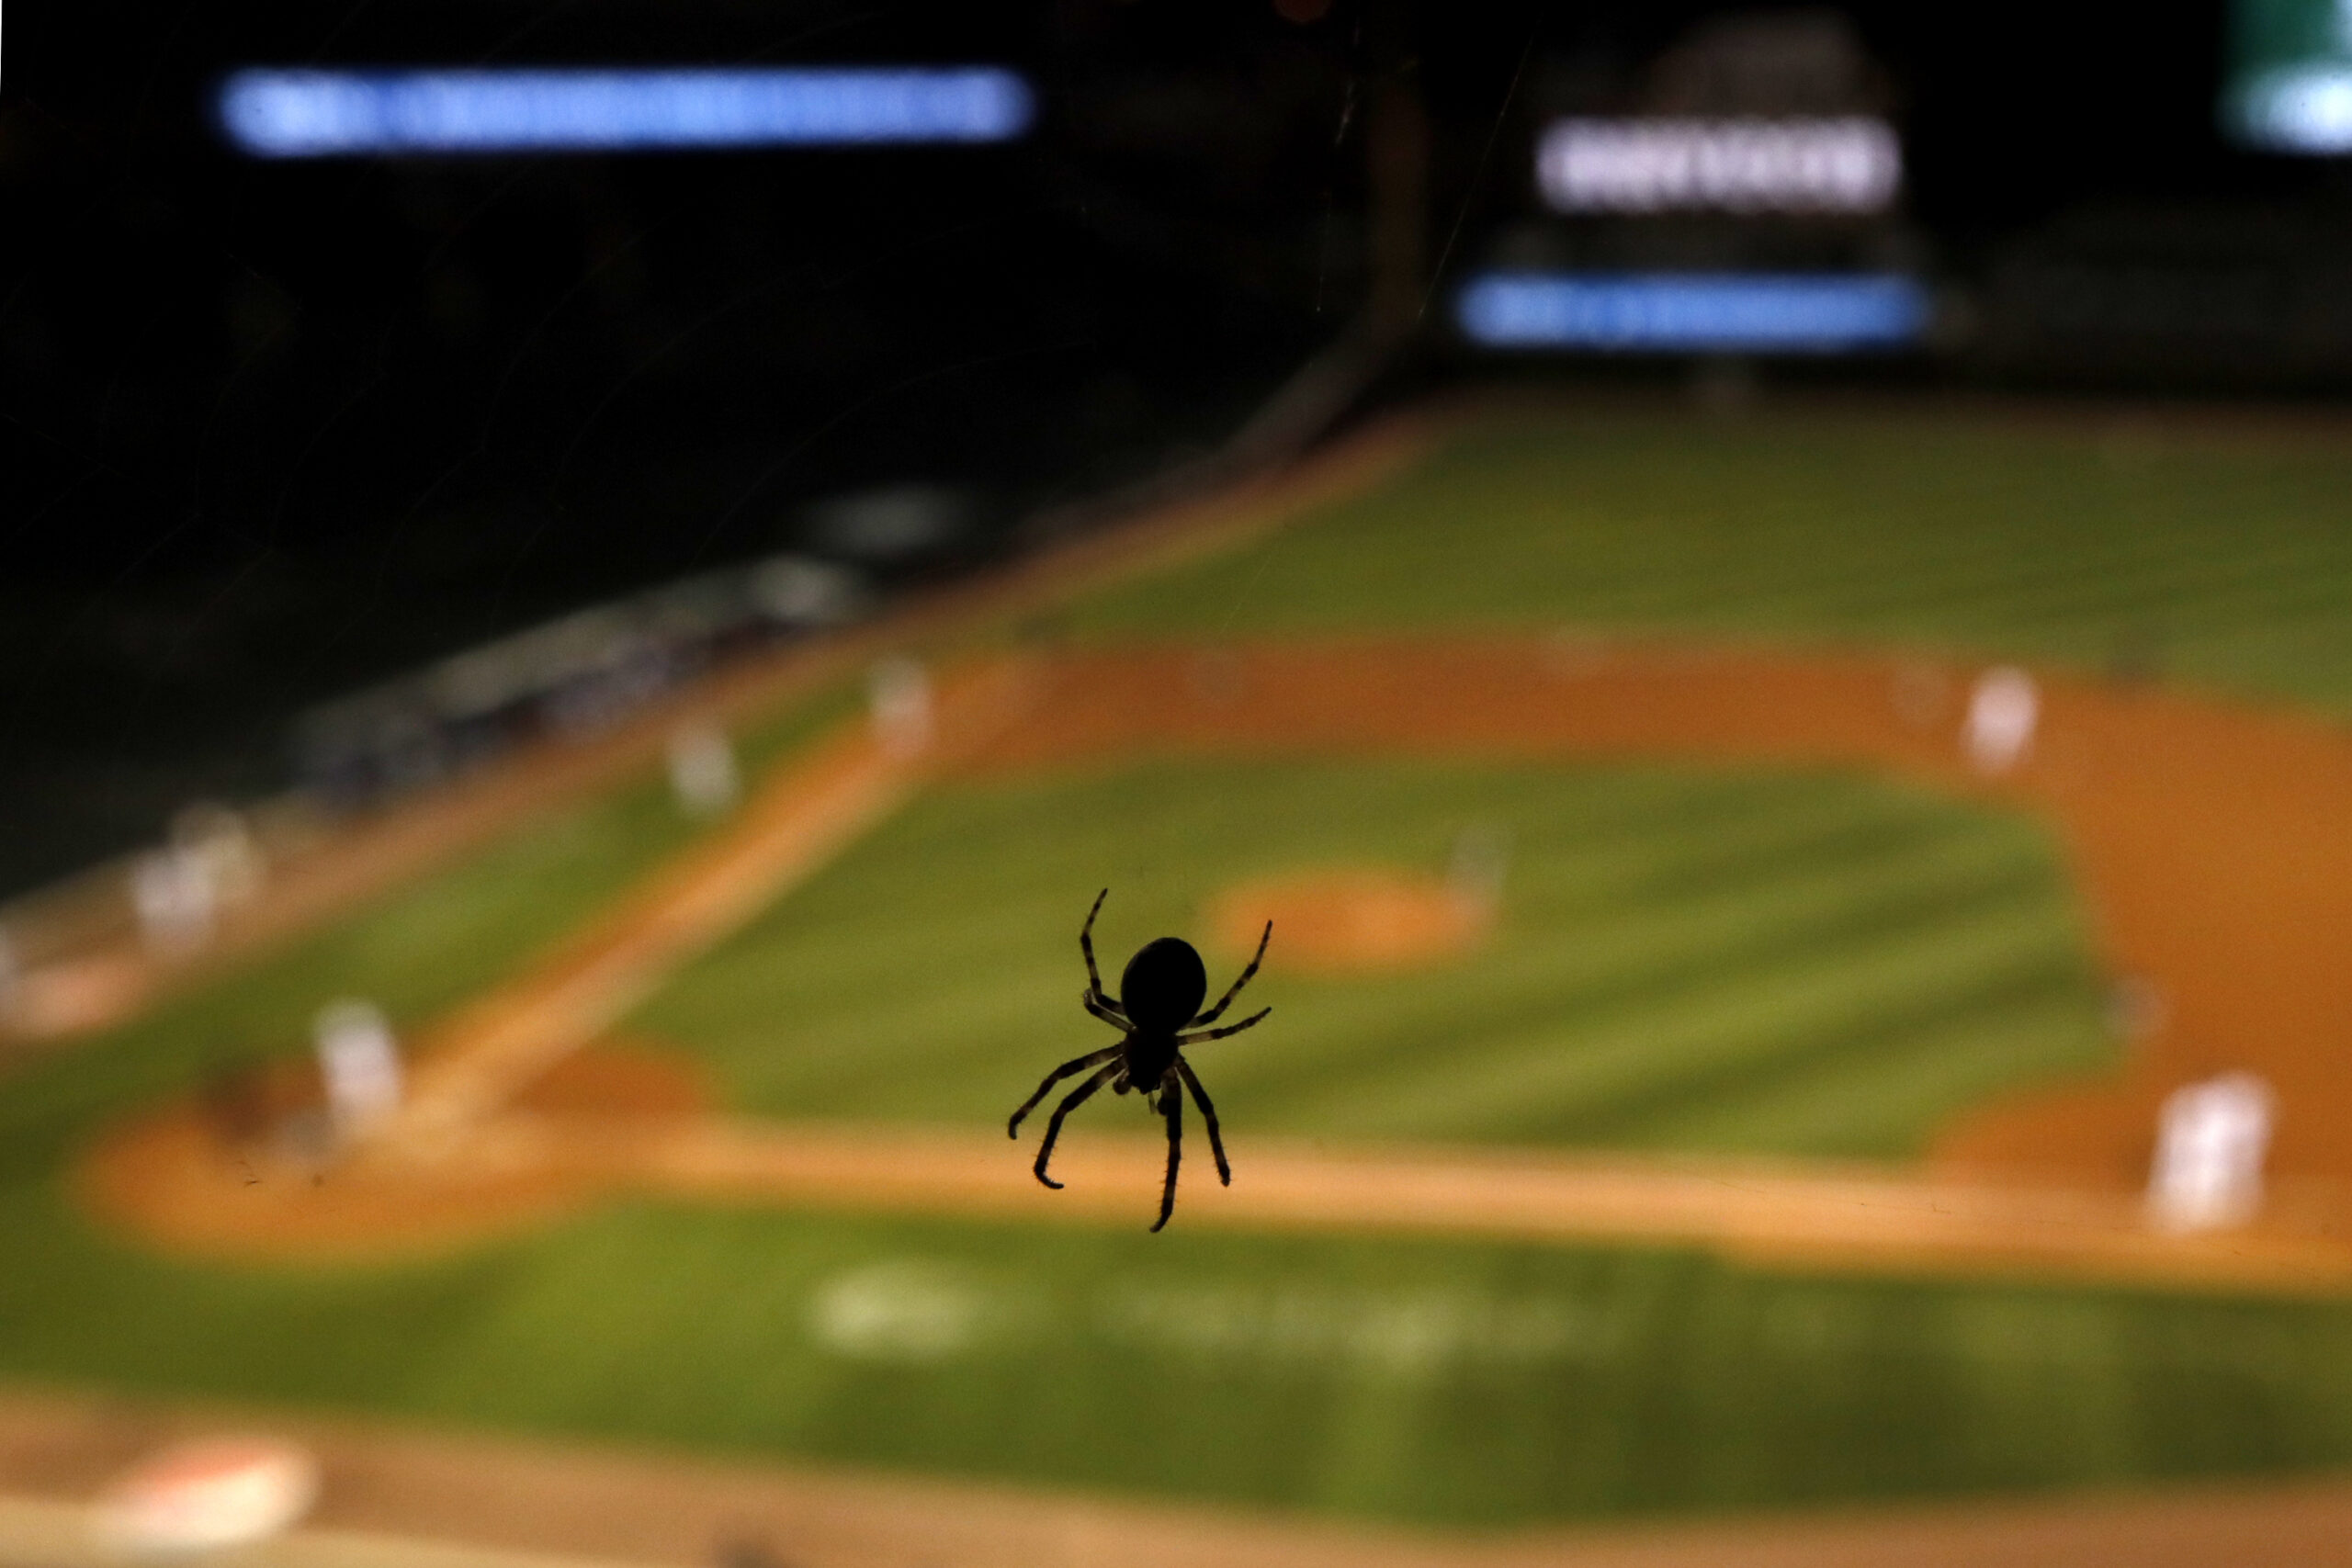 A spider spins a web at Wrigley Field during a baseball game